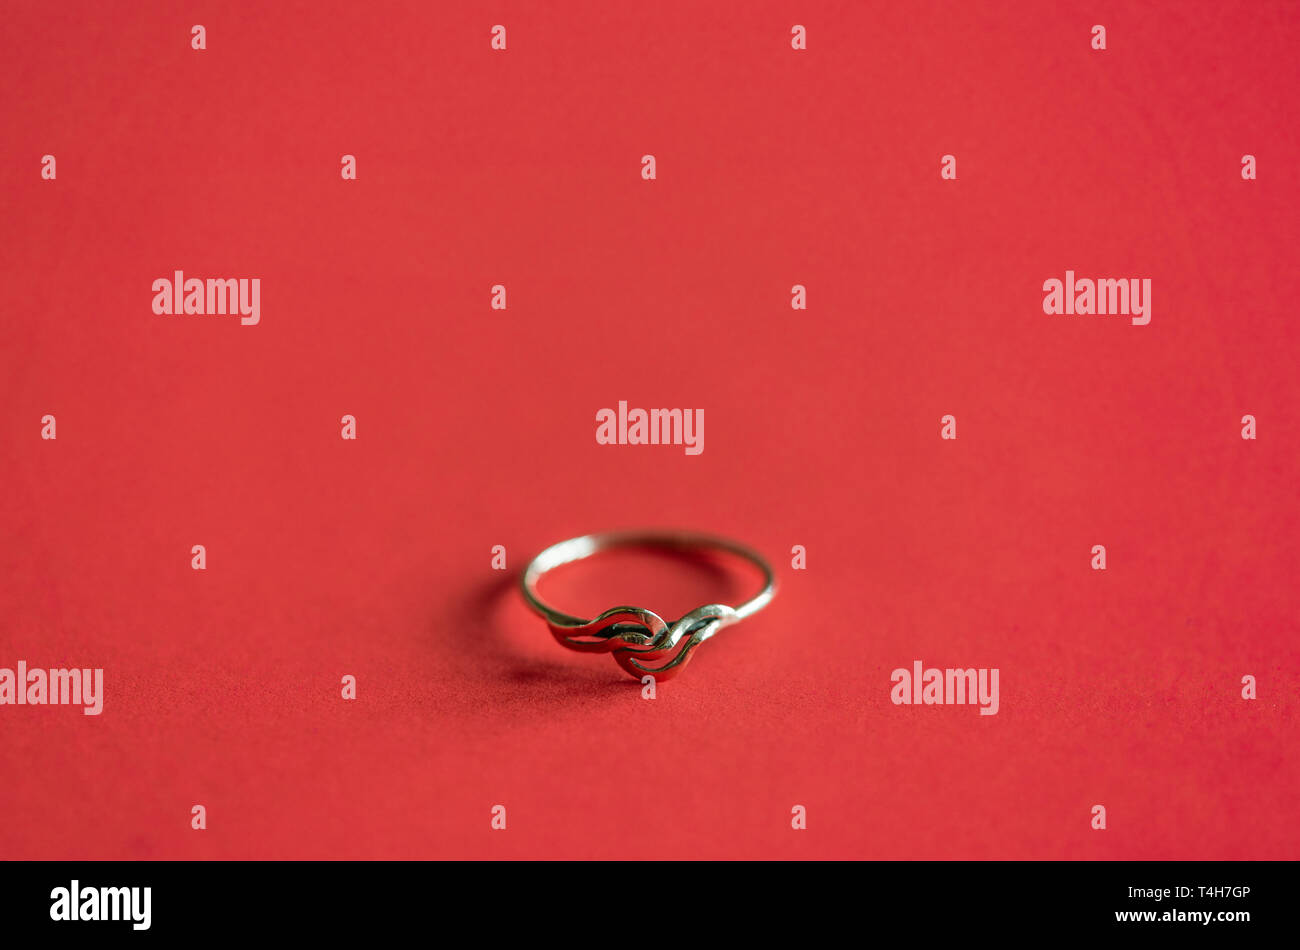 Close up / macro of a gold ring on coral red coloured background Stock Photo